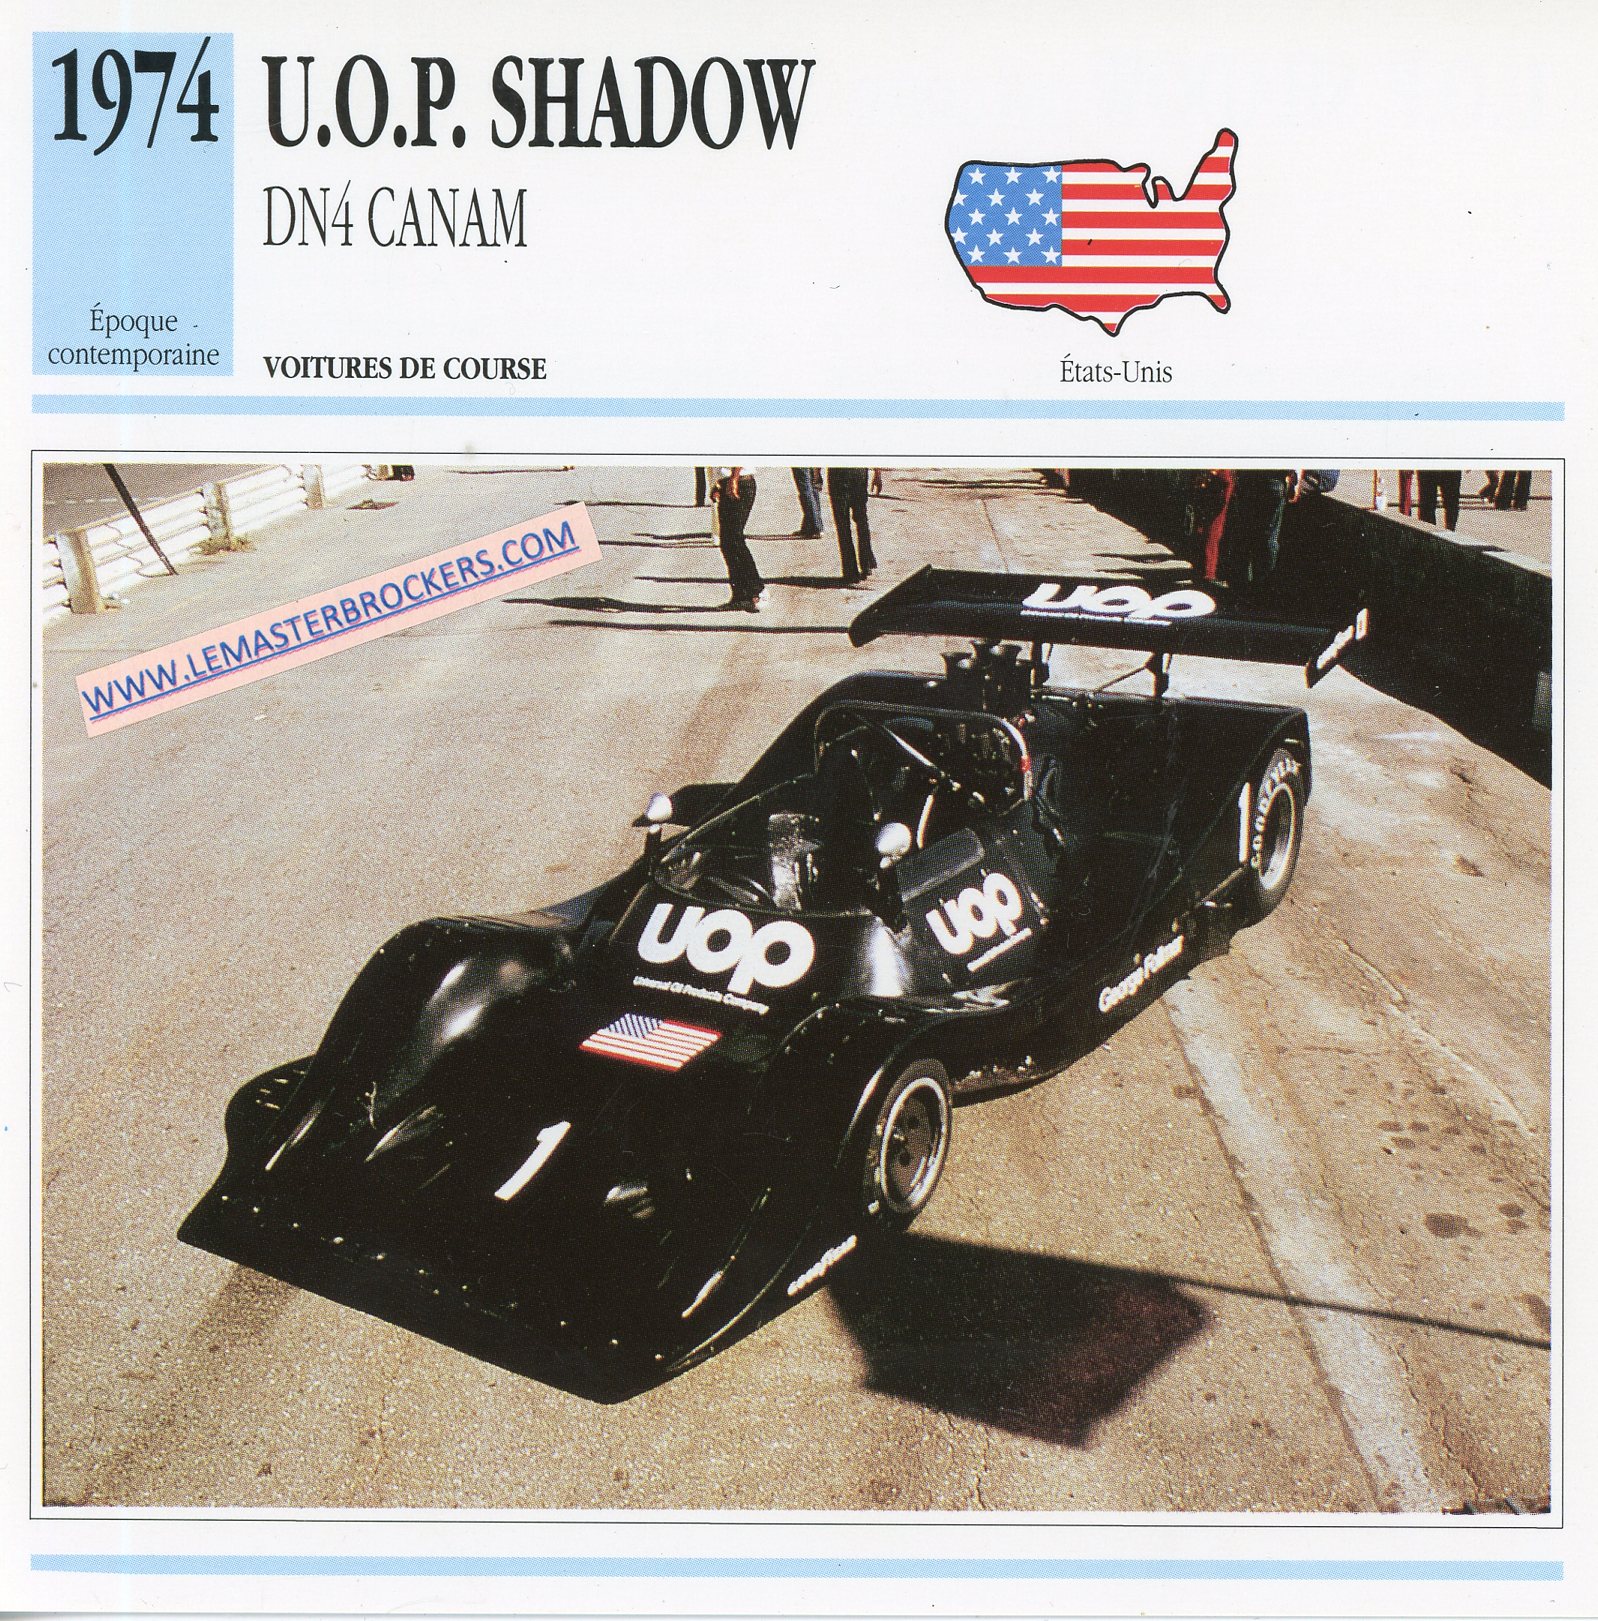 FICHE-AUTO-UOP-SHADOW-DN4-CANAM-1974-LEMASTERBROCKERS